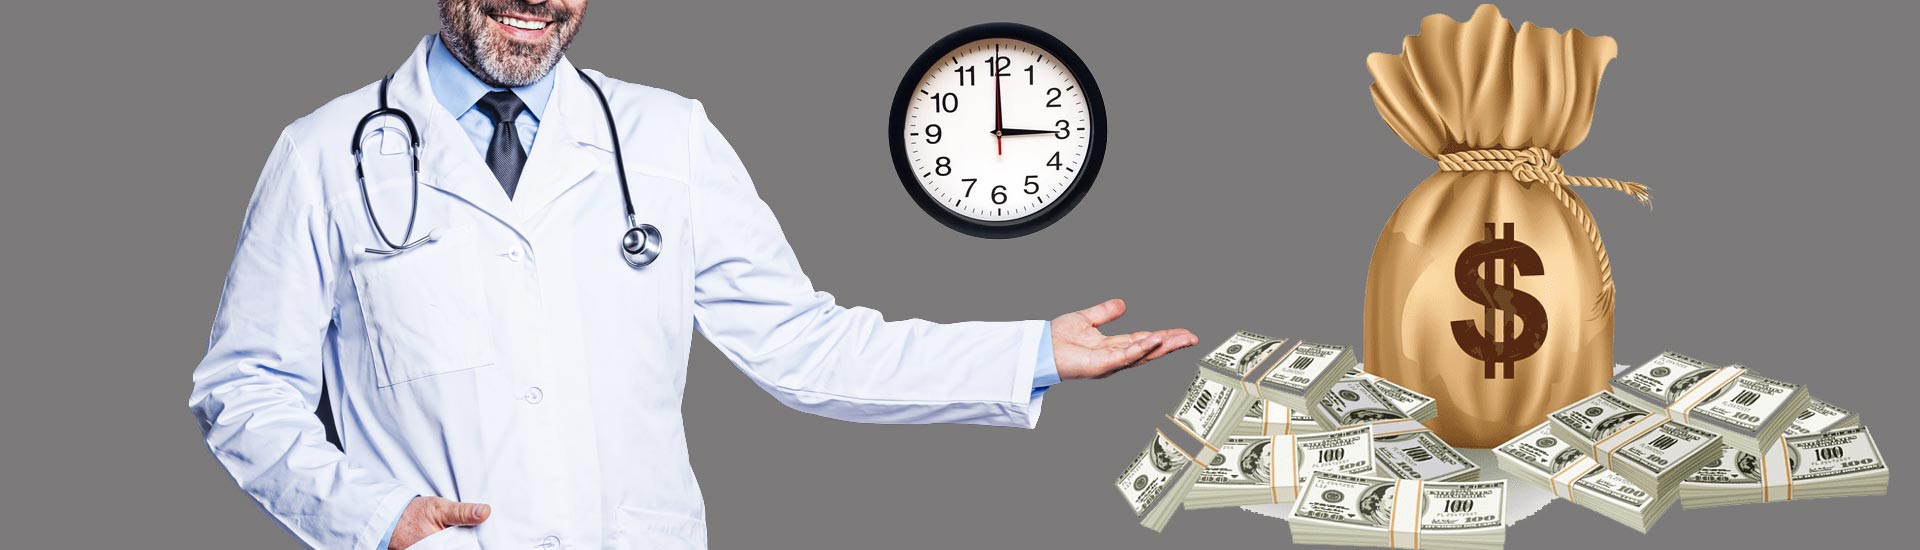 get-paid-on-time-in-medical-billing-process